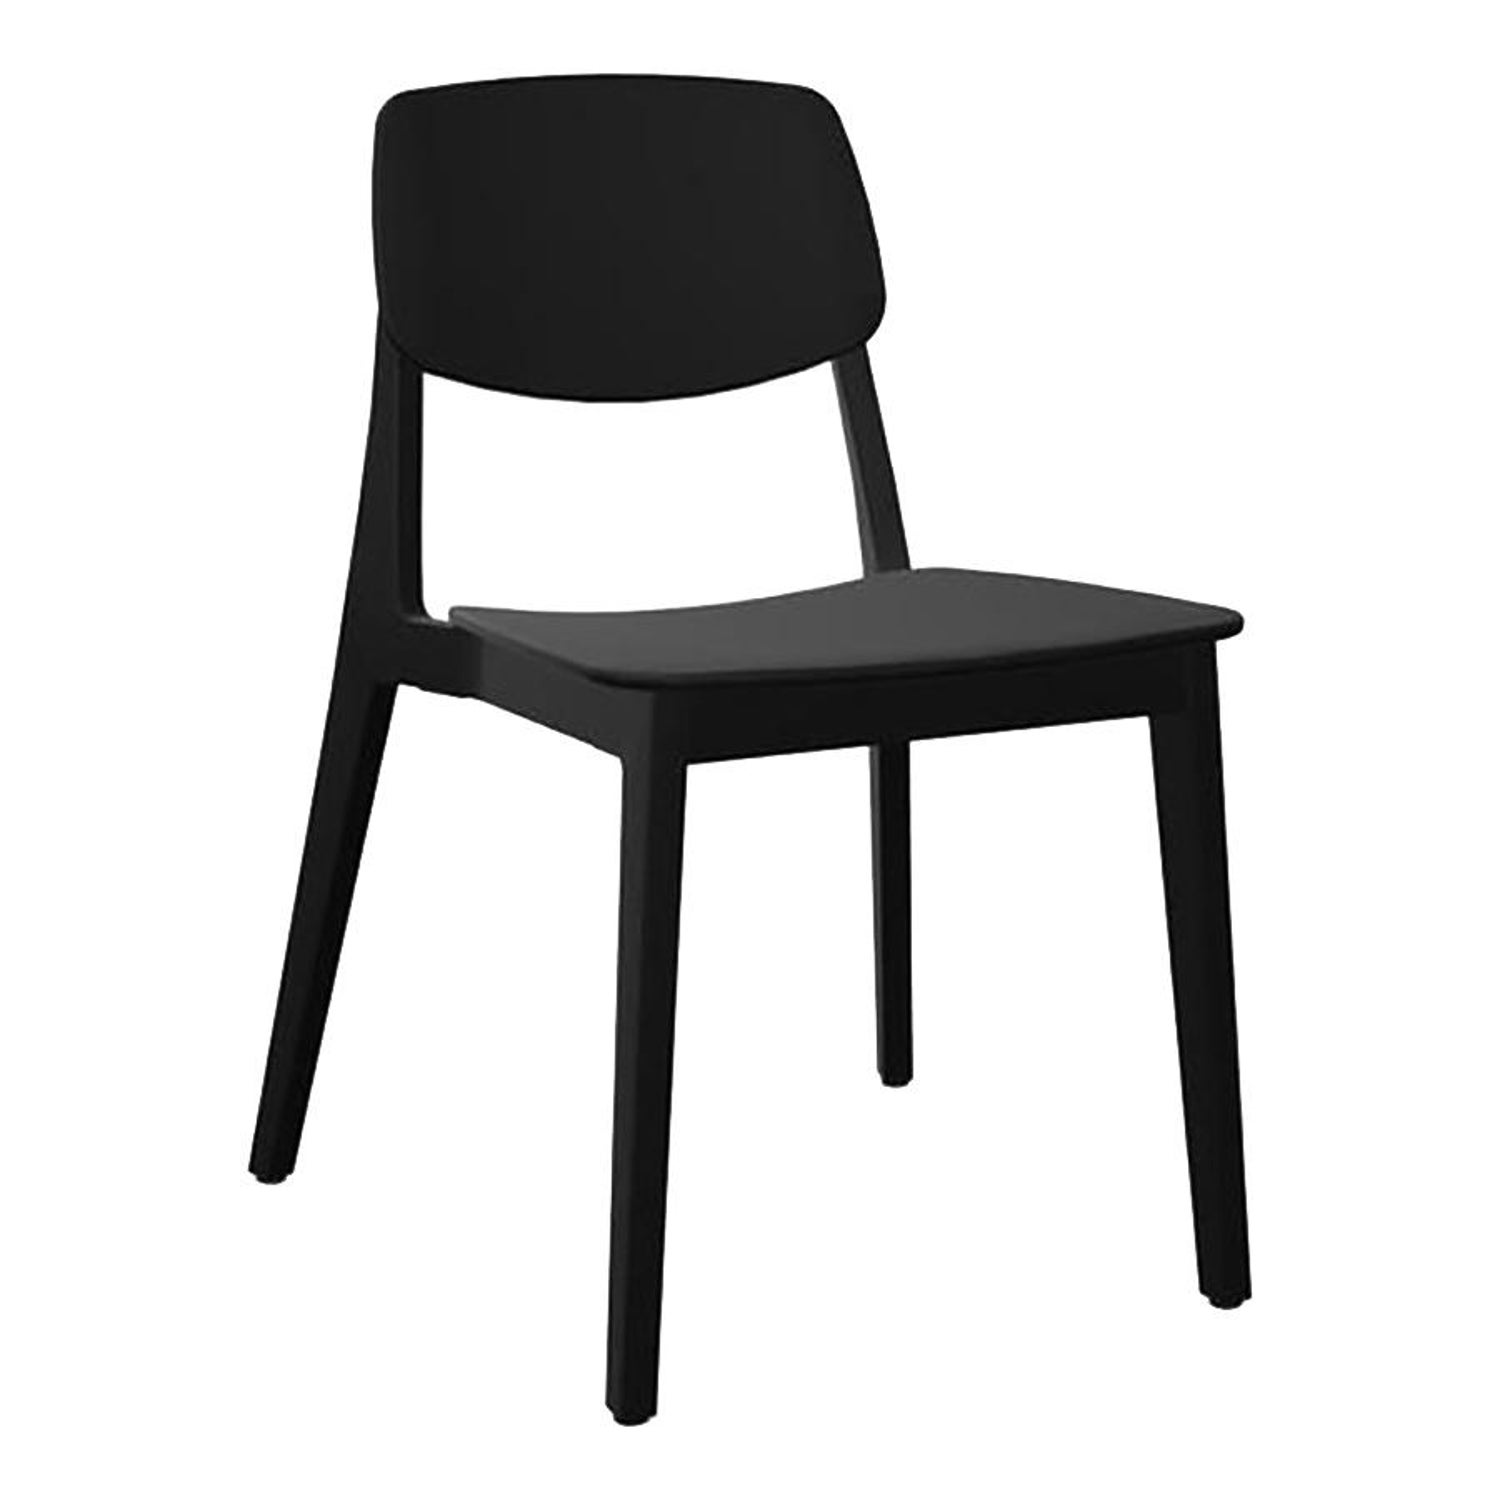 Dietiker Felber C14 Dining Chair, Modular Dining Chairs